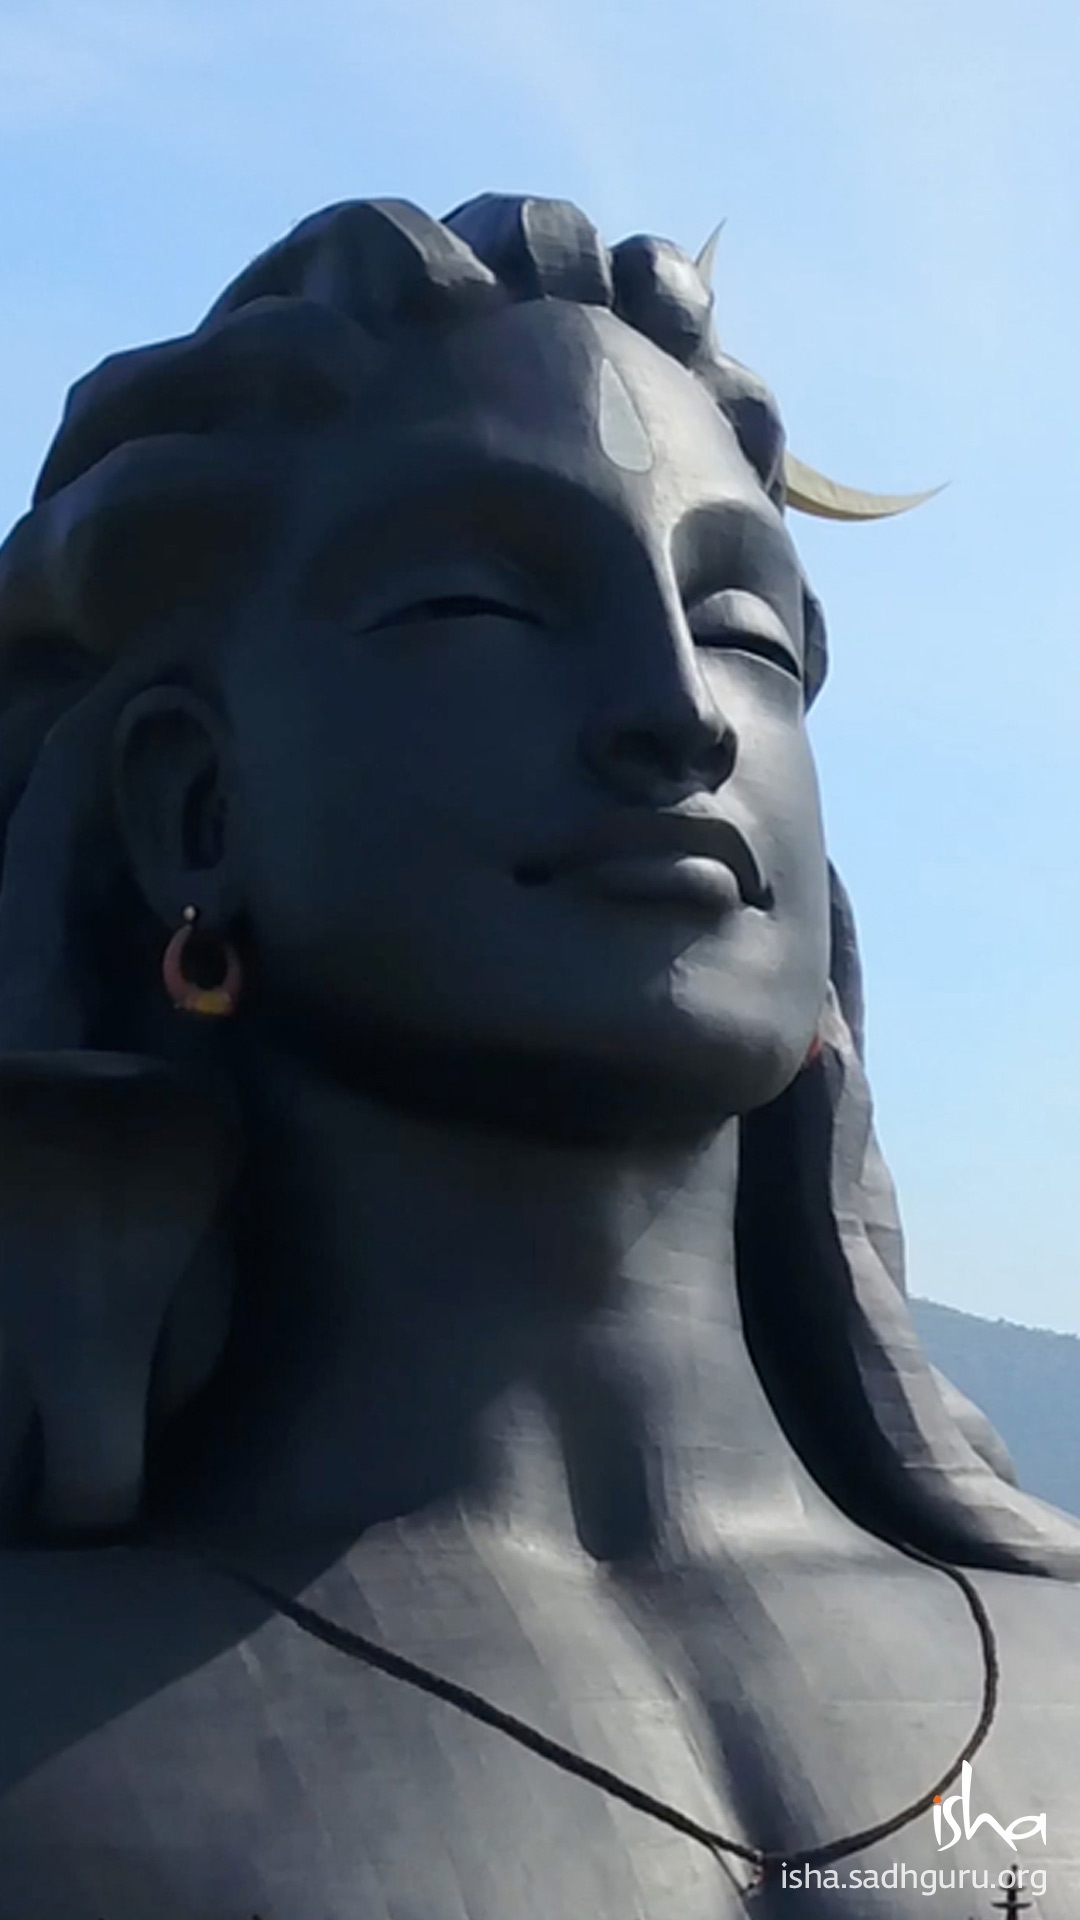 Hd Wallpapers For Mobile Of Lord Shiva